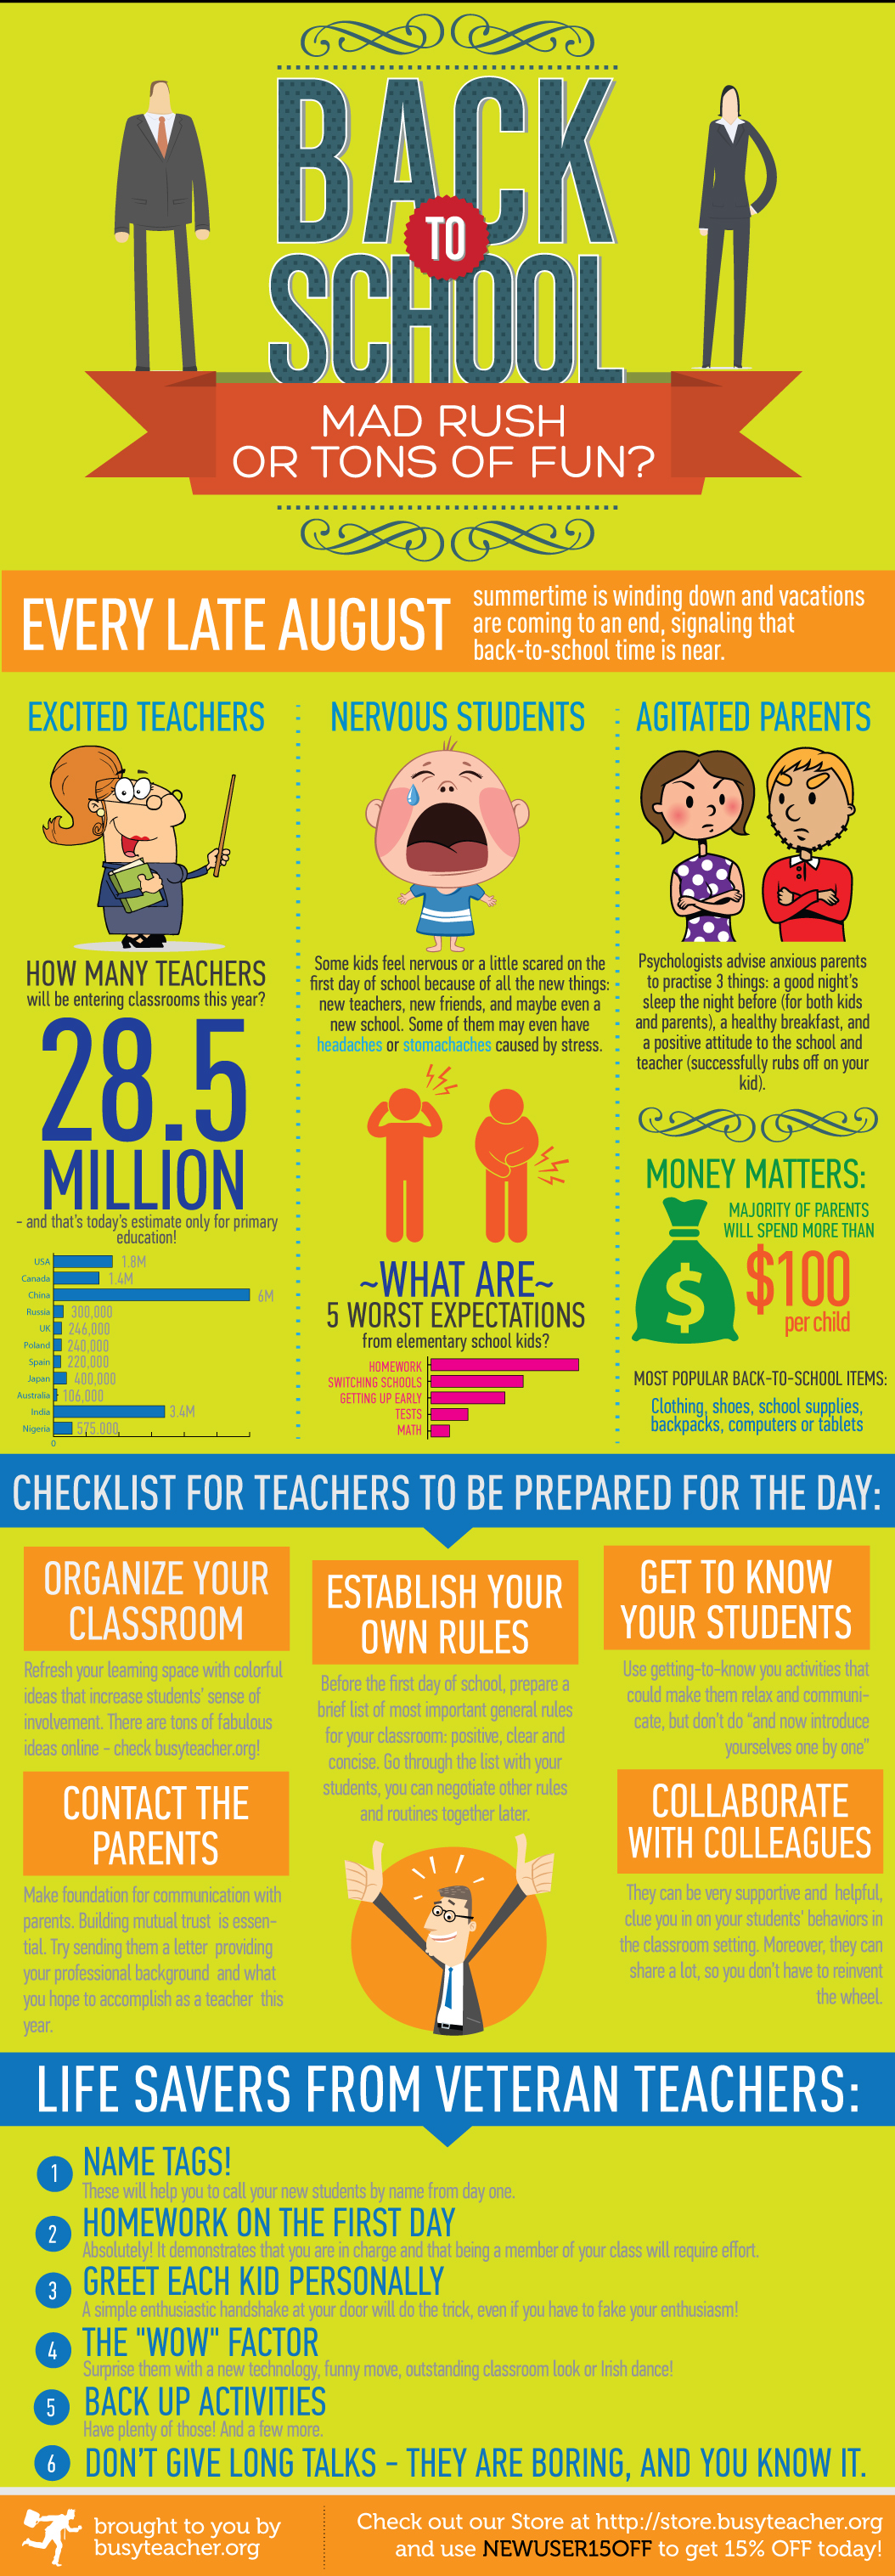 Back to School � Mad Rush or Tons of Fun? [INFOGRAPHIC]